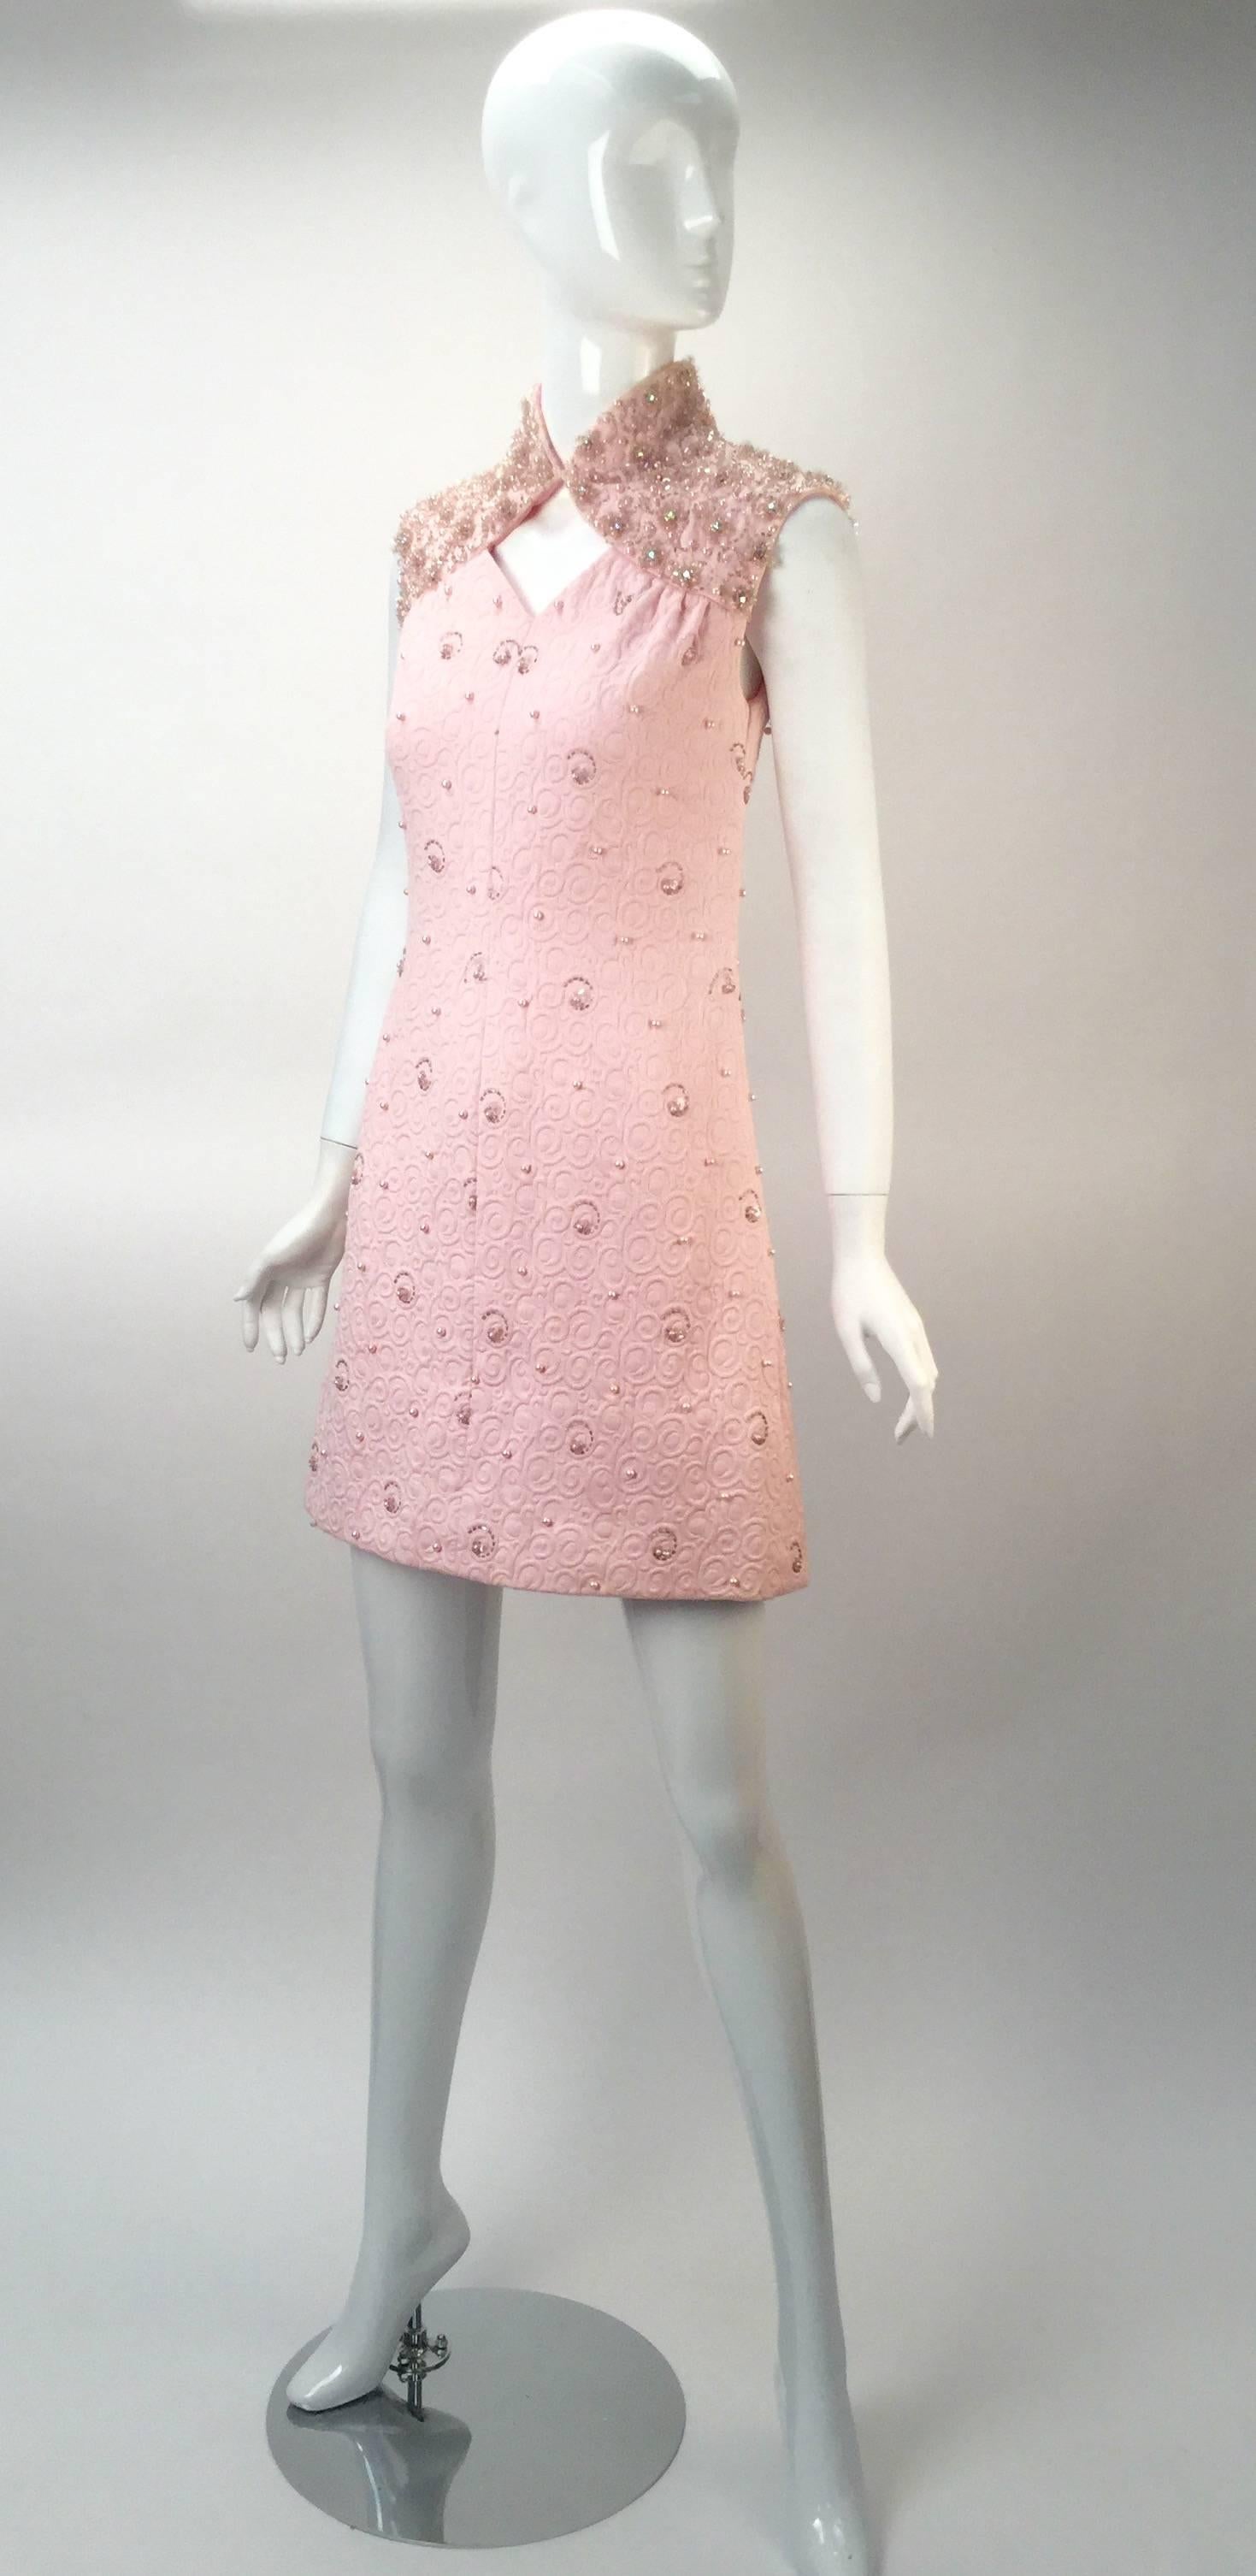 Wonderful spring mini dress by Canadian fashion designer Ruth Dukas.  The dress is a pink cotton jacquard with great bead work. 

Heavily sequined and beaded collar and shoulders. Diamond cut-out on breast bone. Dress is fully lined. Zipper center